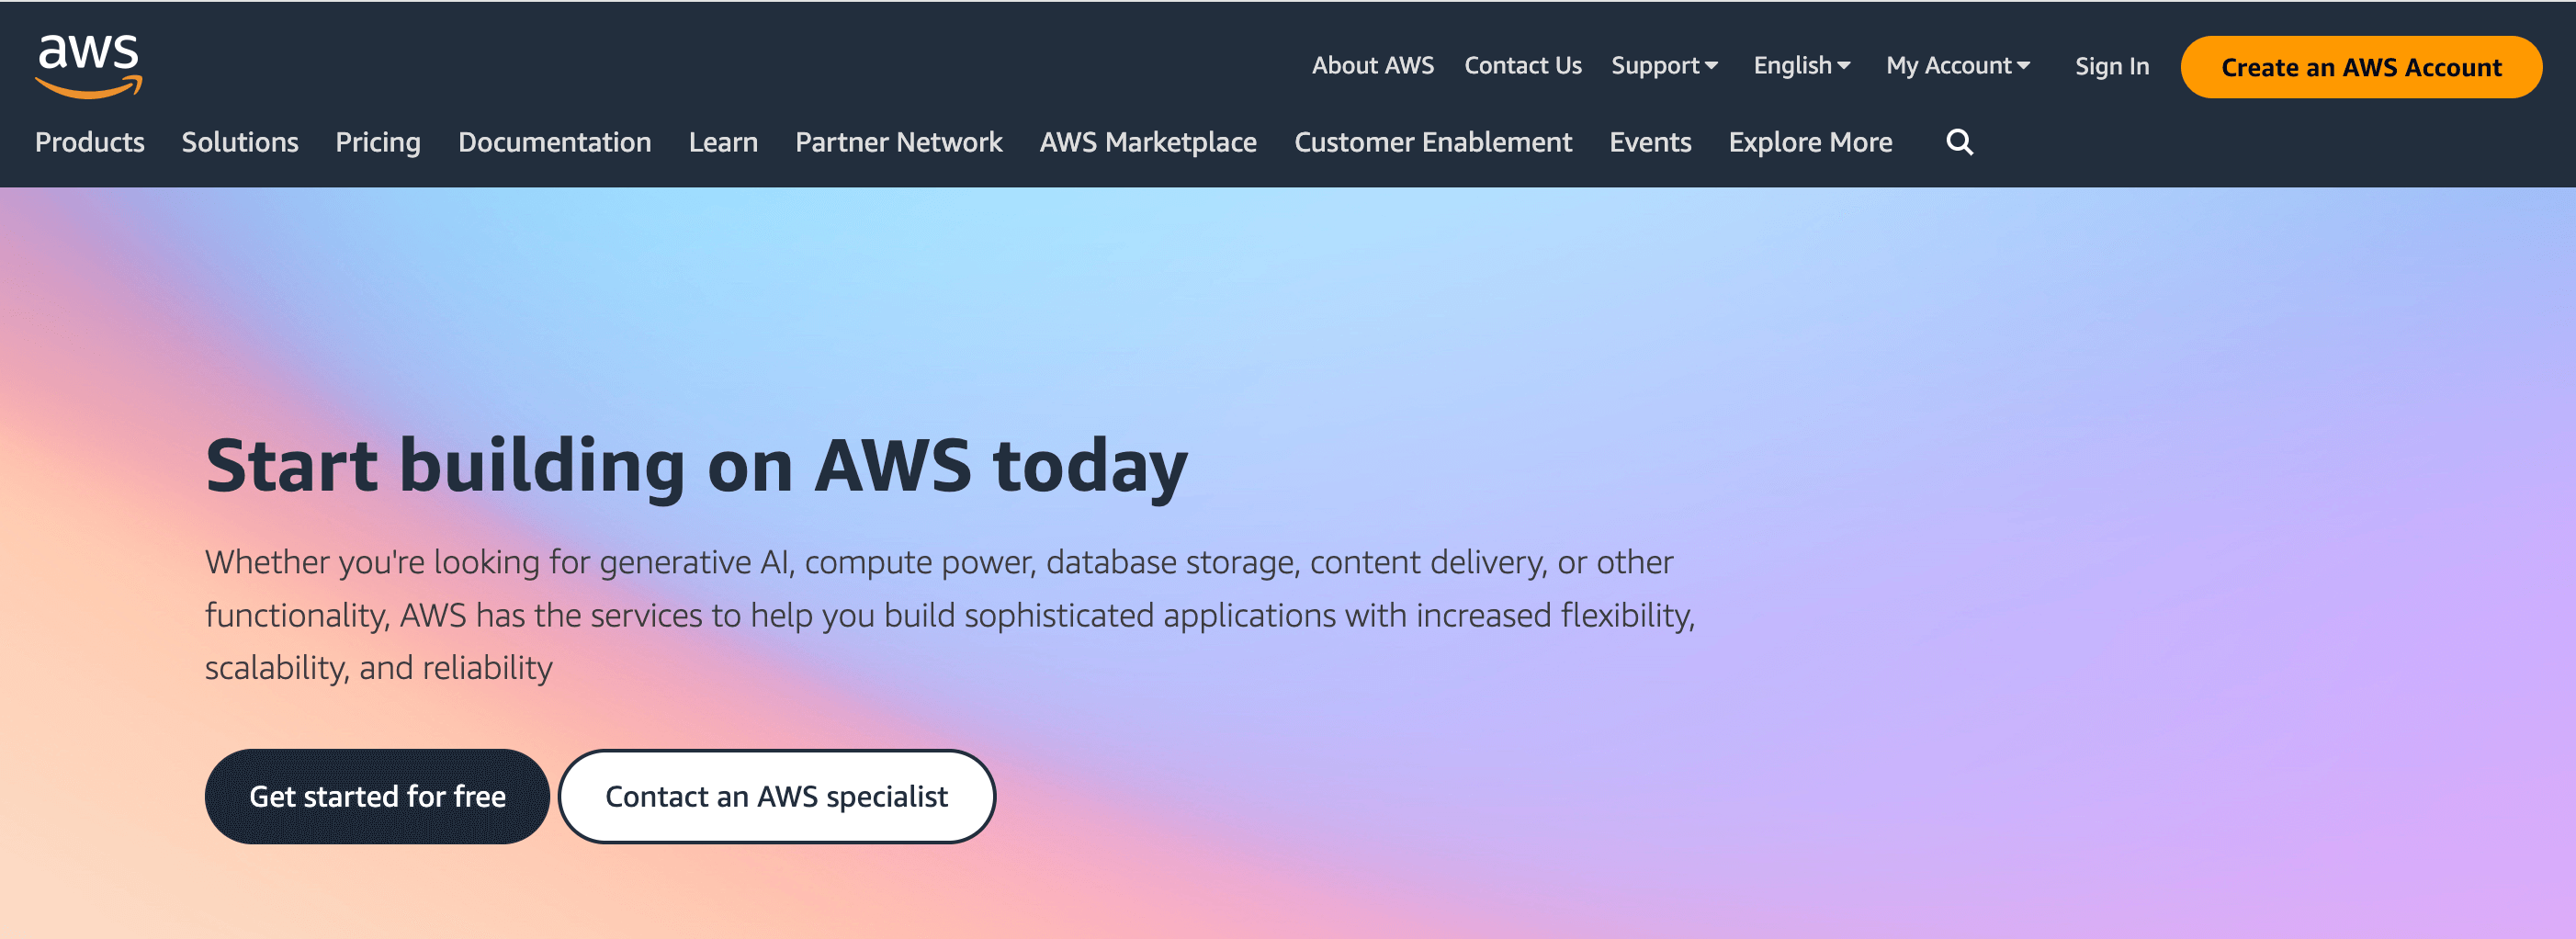 AWS website home page